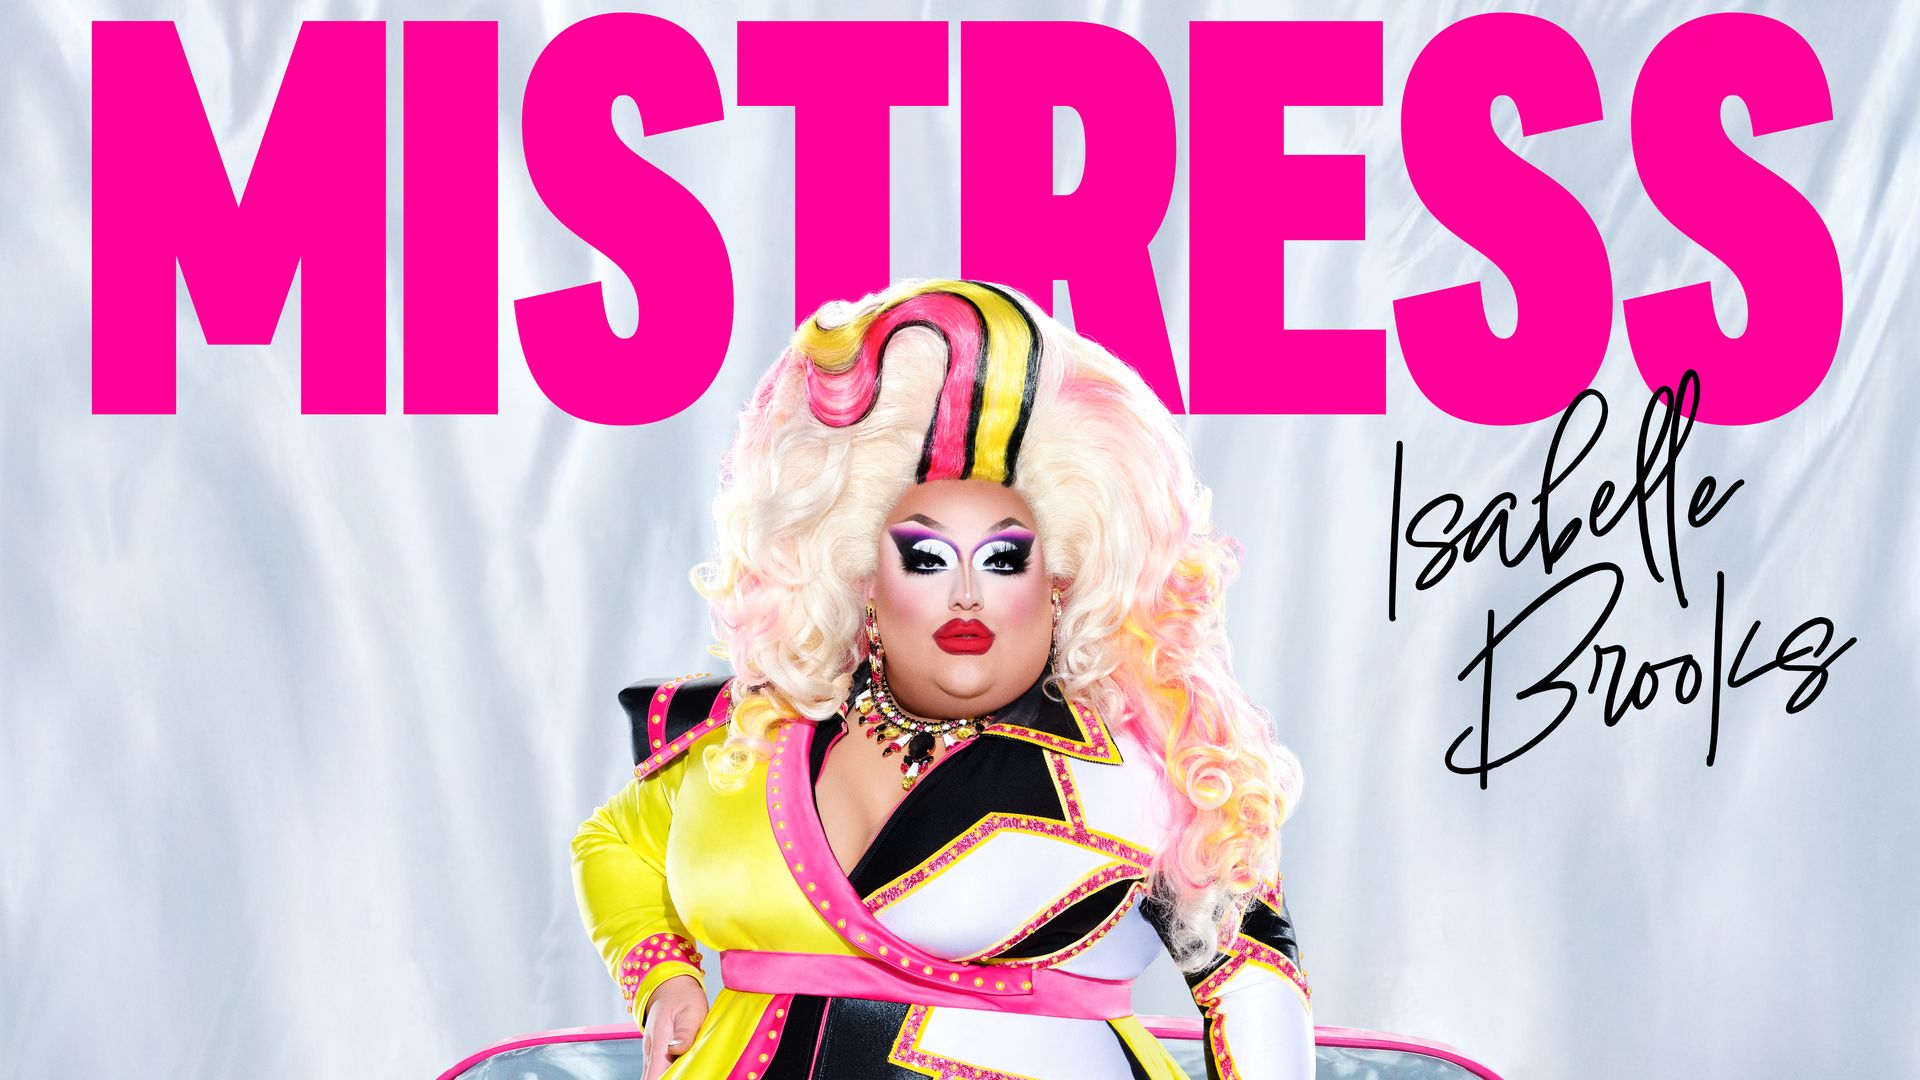 Photo of a drag queen named with the text "Mistress Isabelle Brooks"